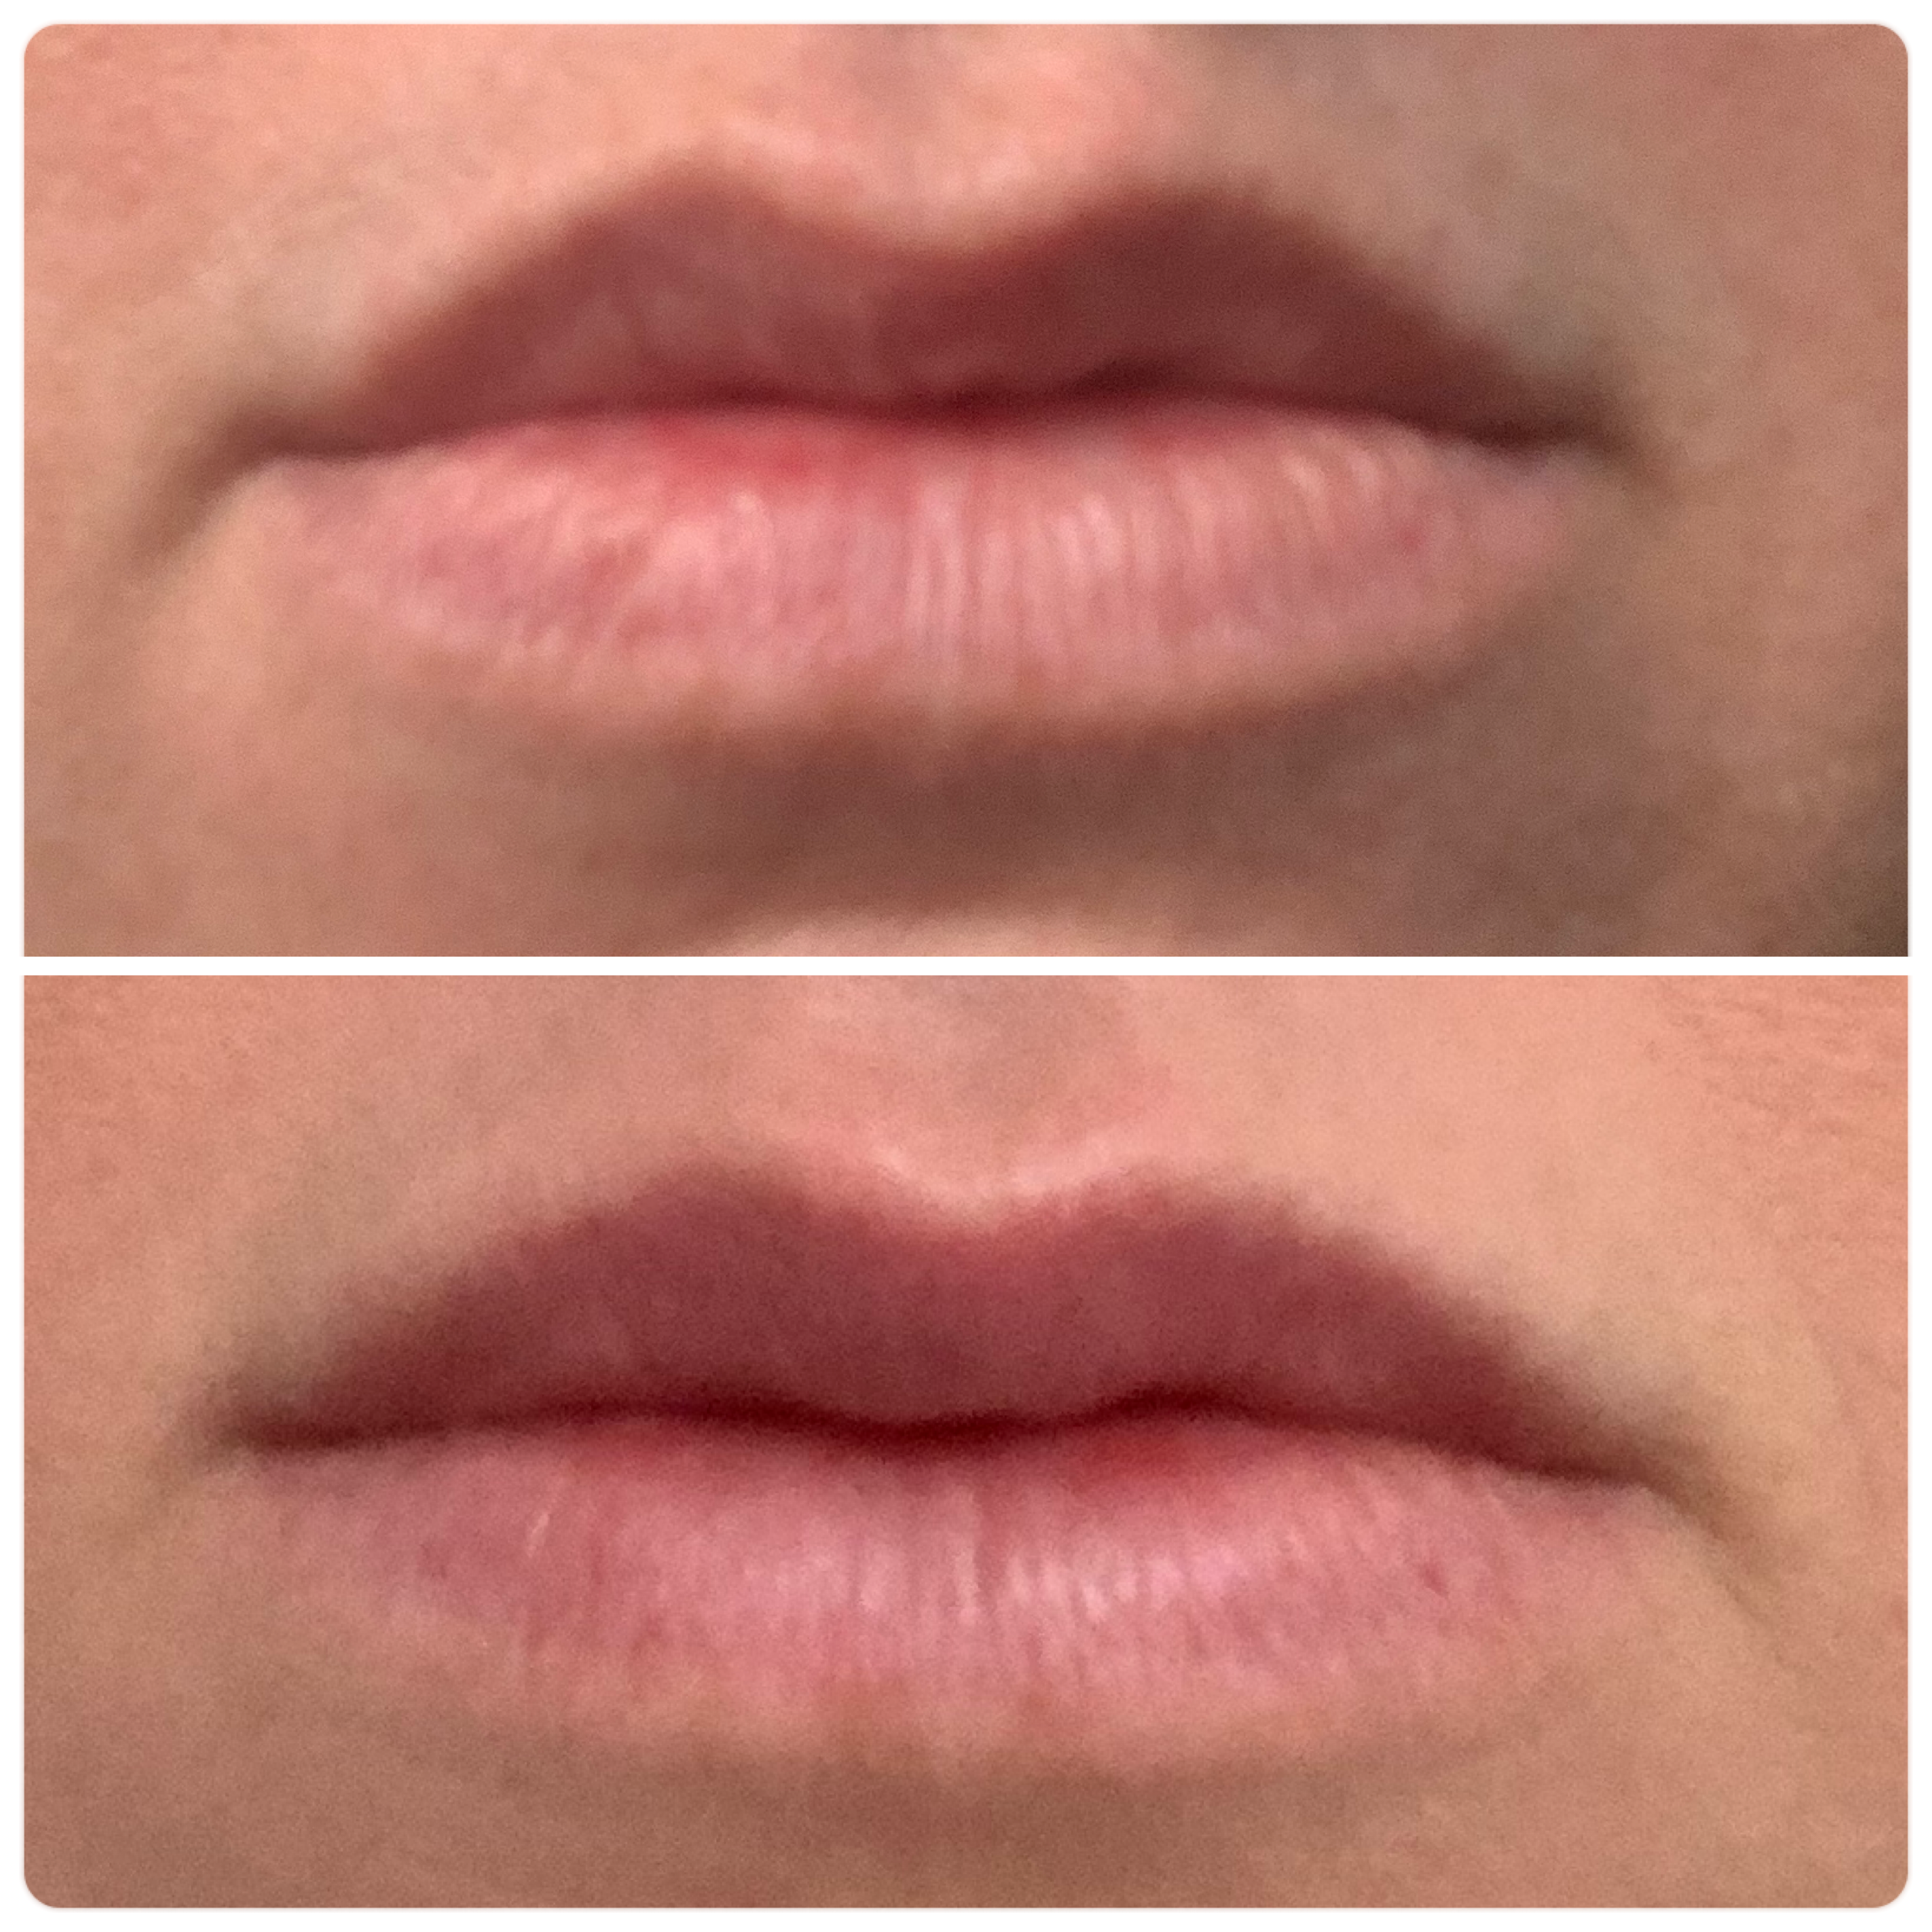 Lip Flip with Botox Results